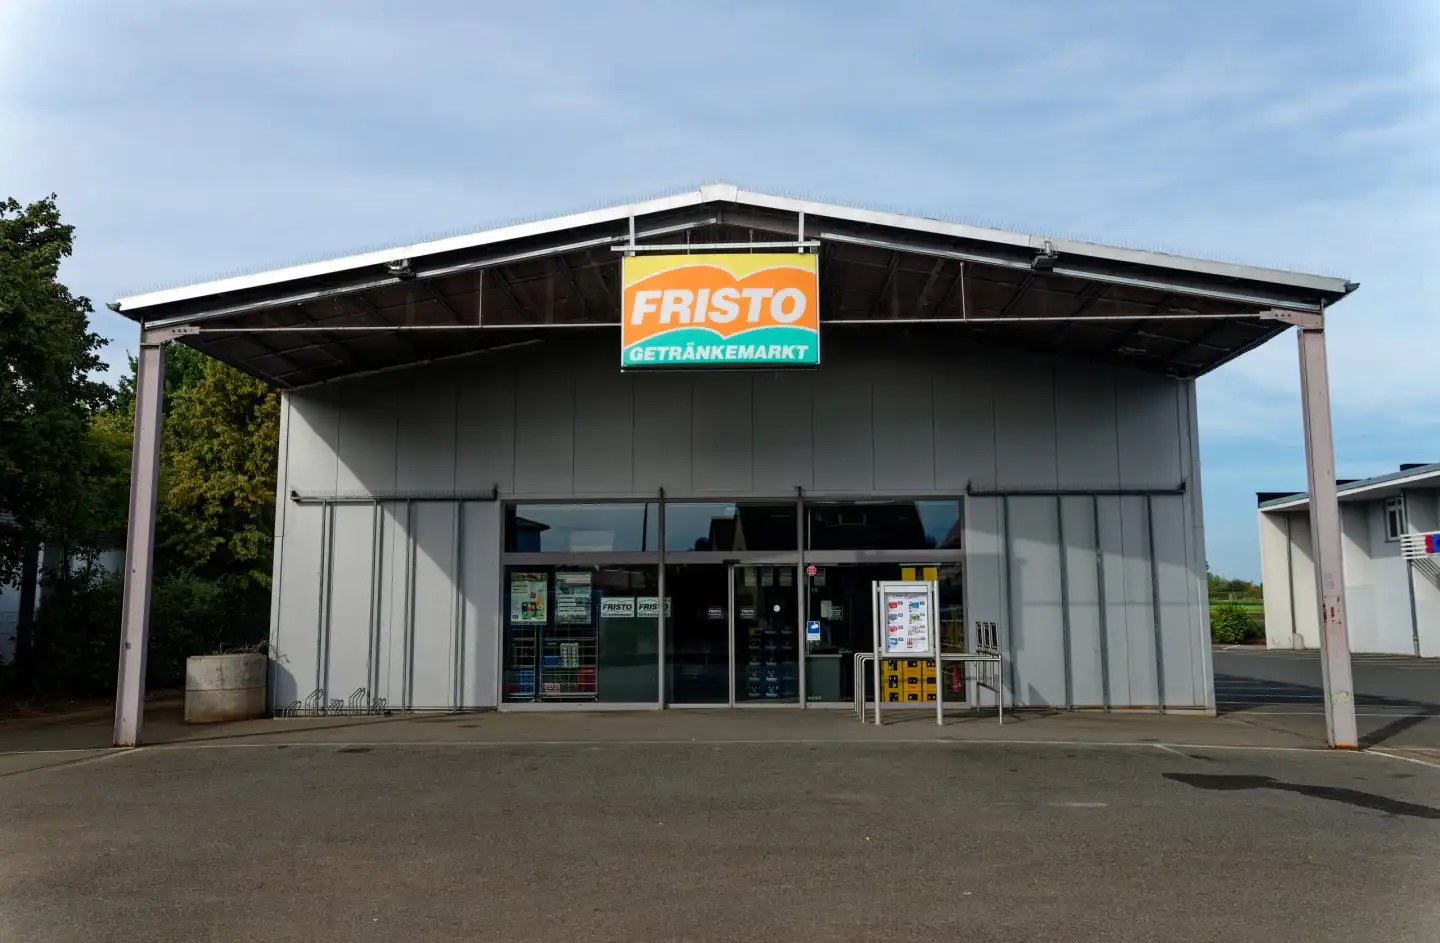 Shop window and logo of the beverage retailer Fristo